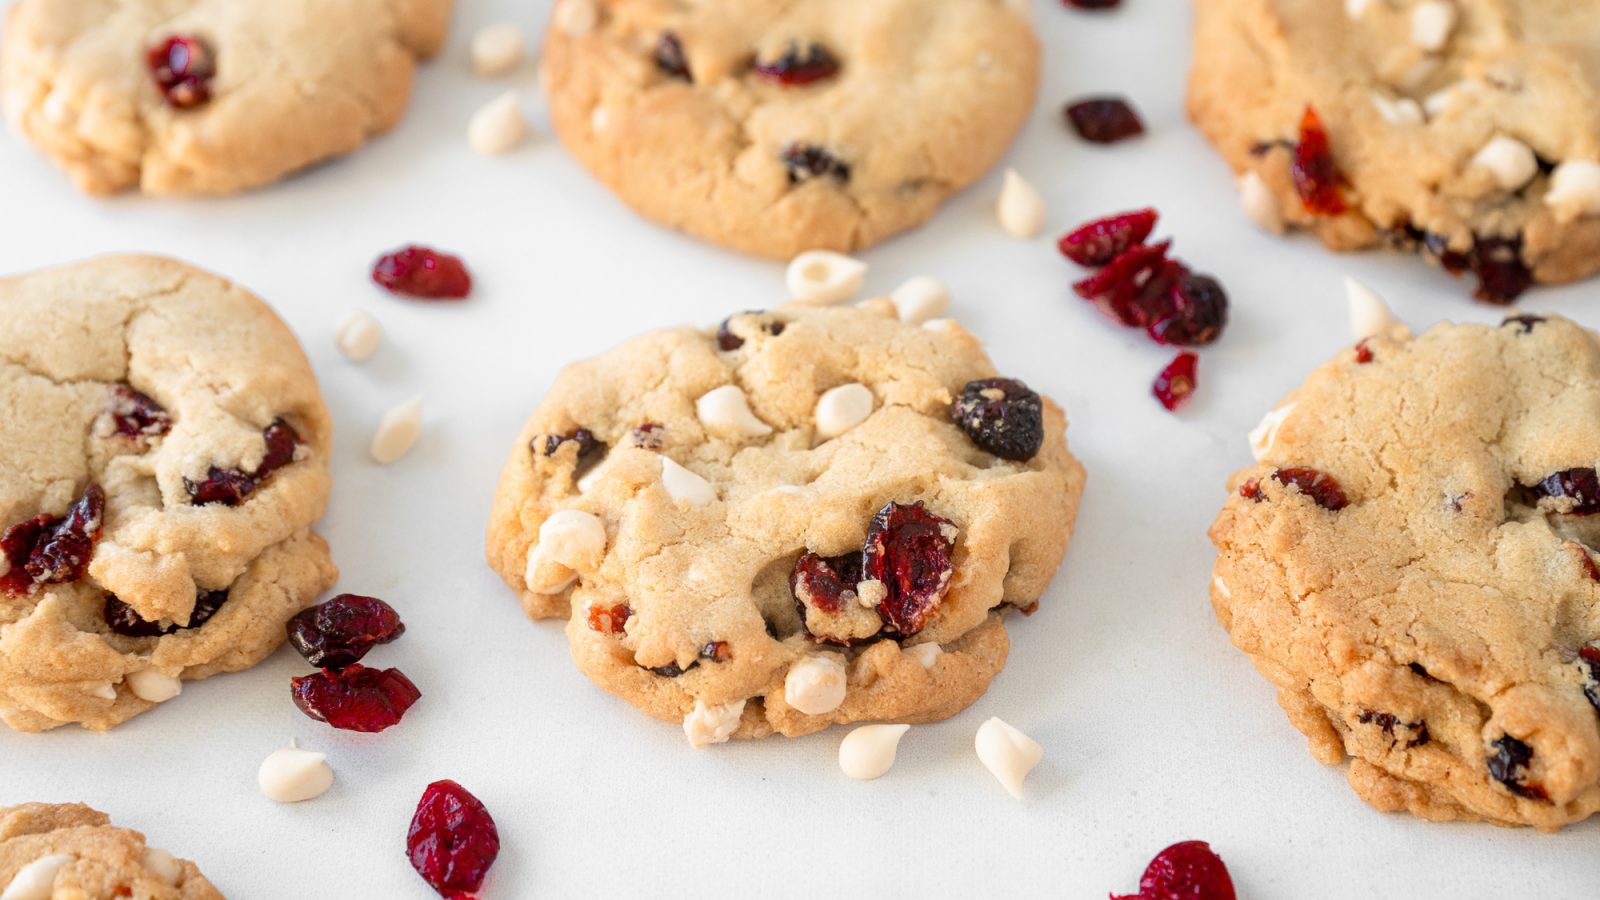 vegan cranberry cookies with white chocolate chips on baking tray